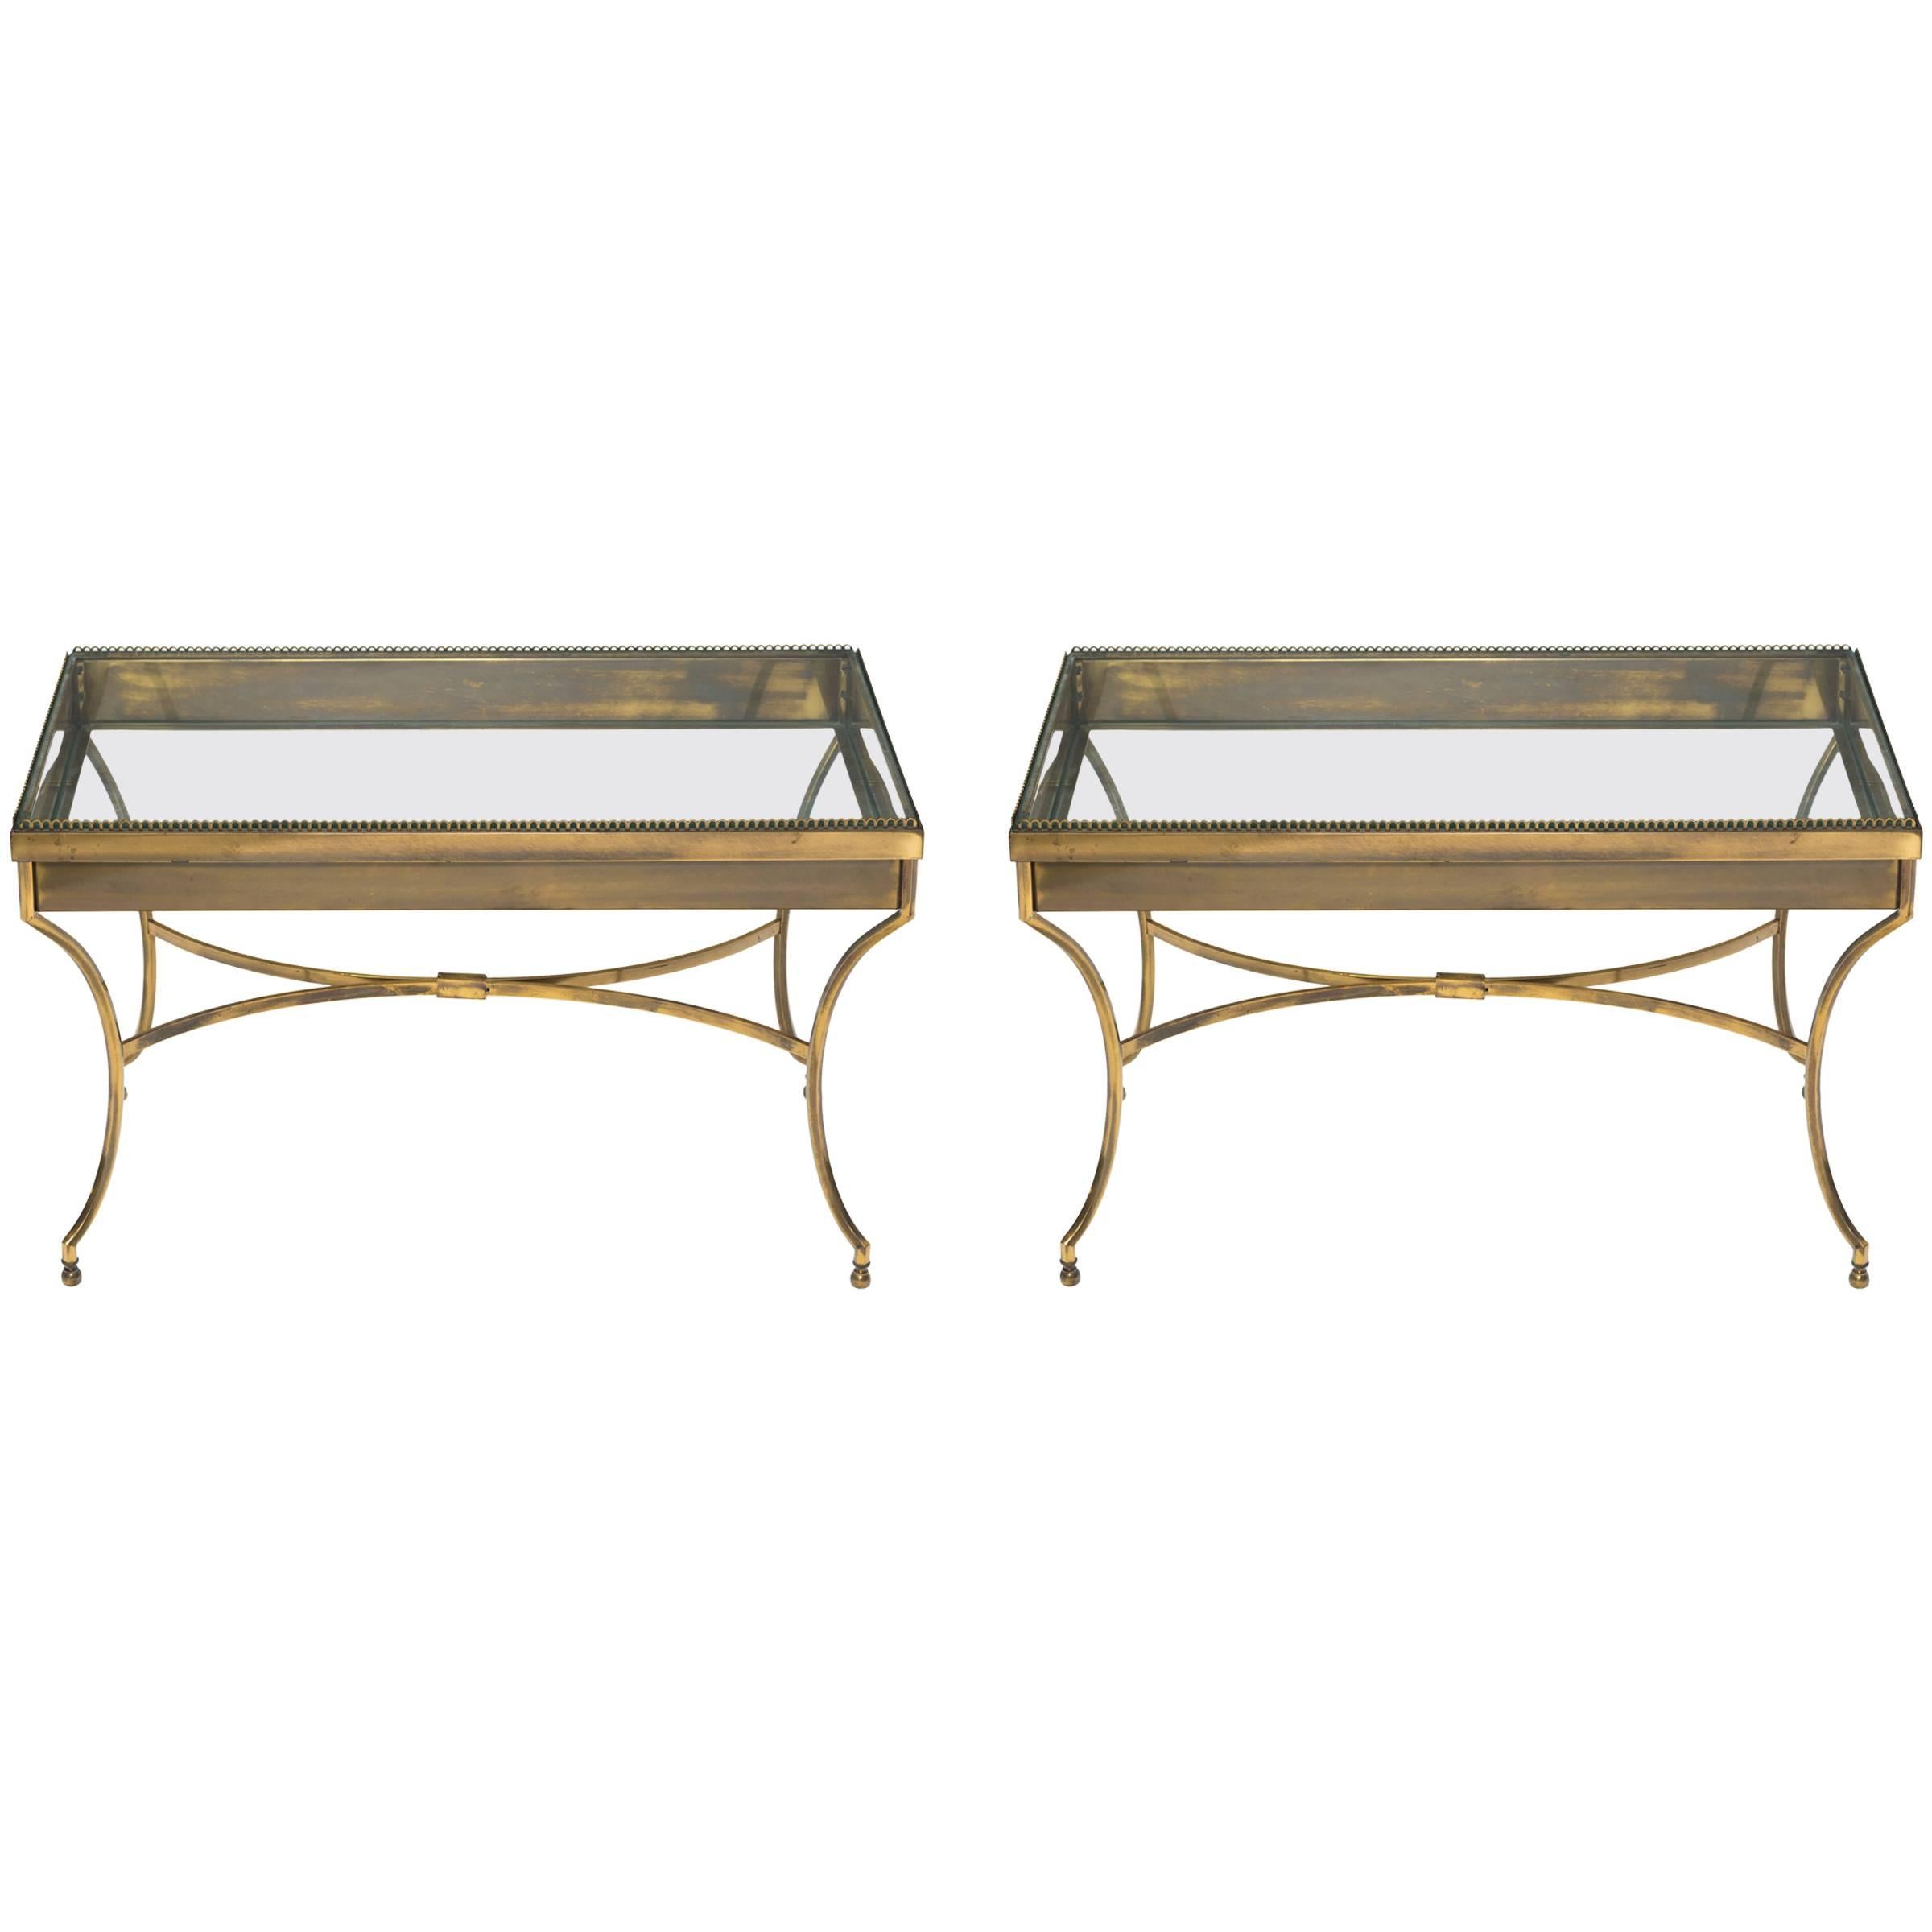 Solid brass display table. Glass top lifts off to display items. There is only one table left. You would be buying one table for the asking price of 1250.00.